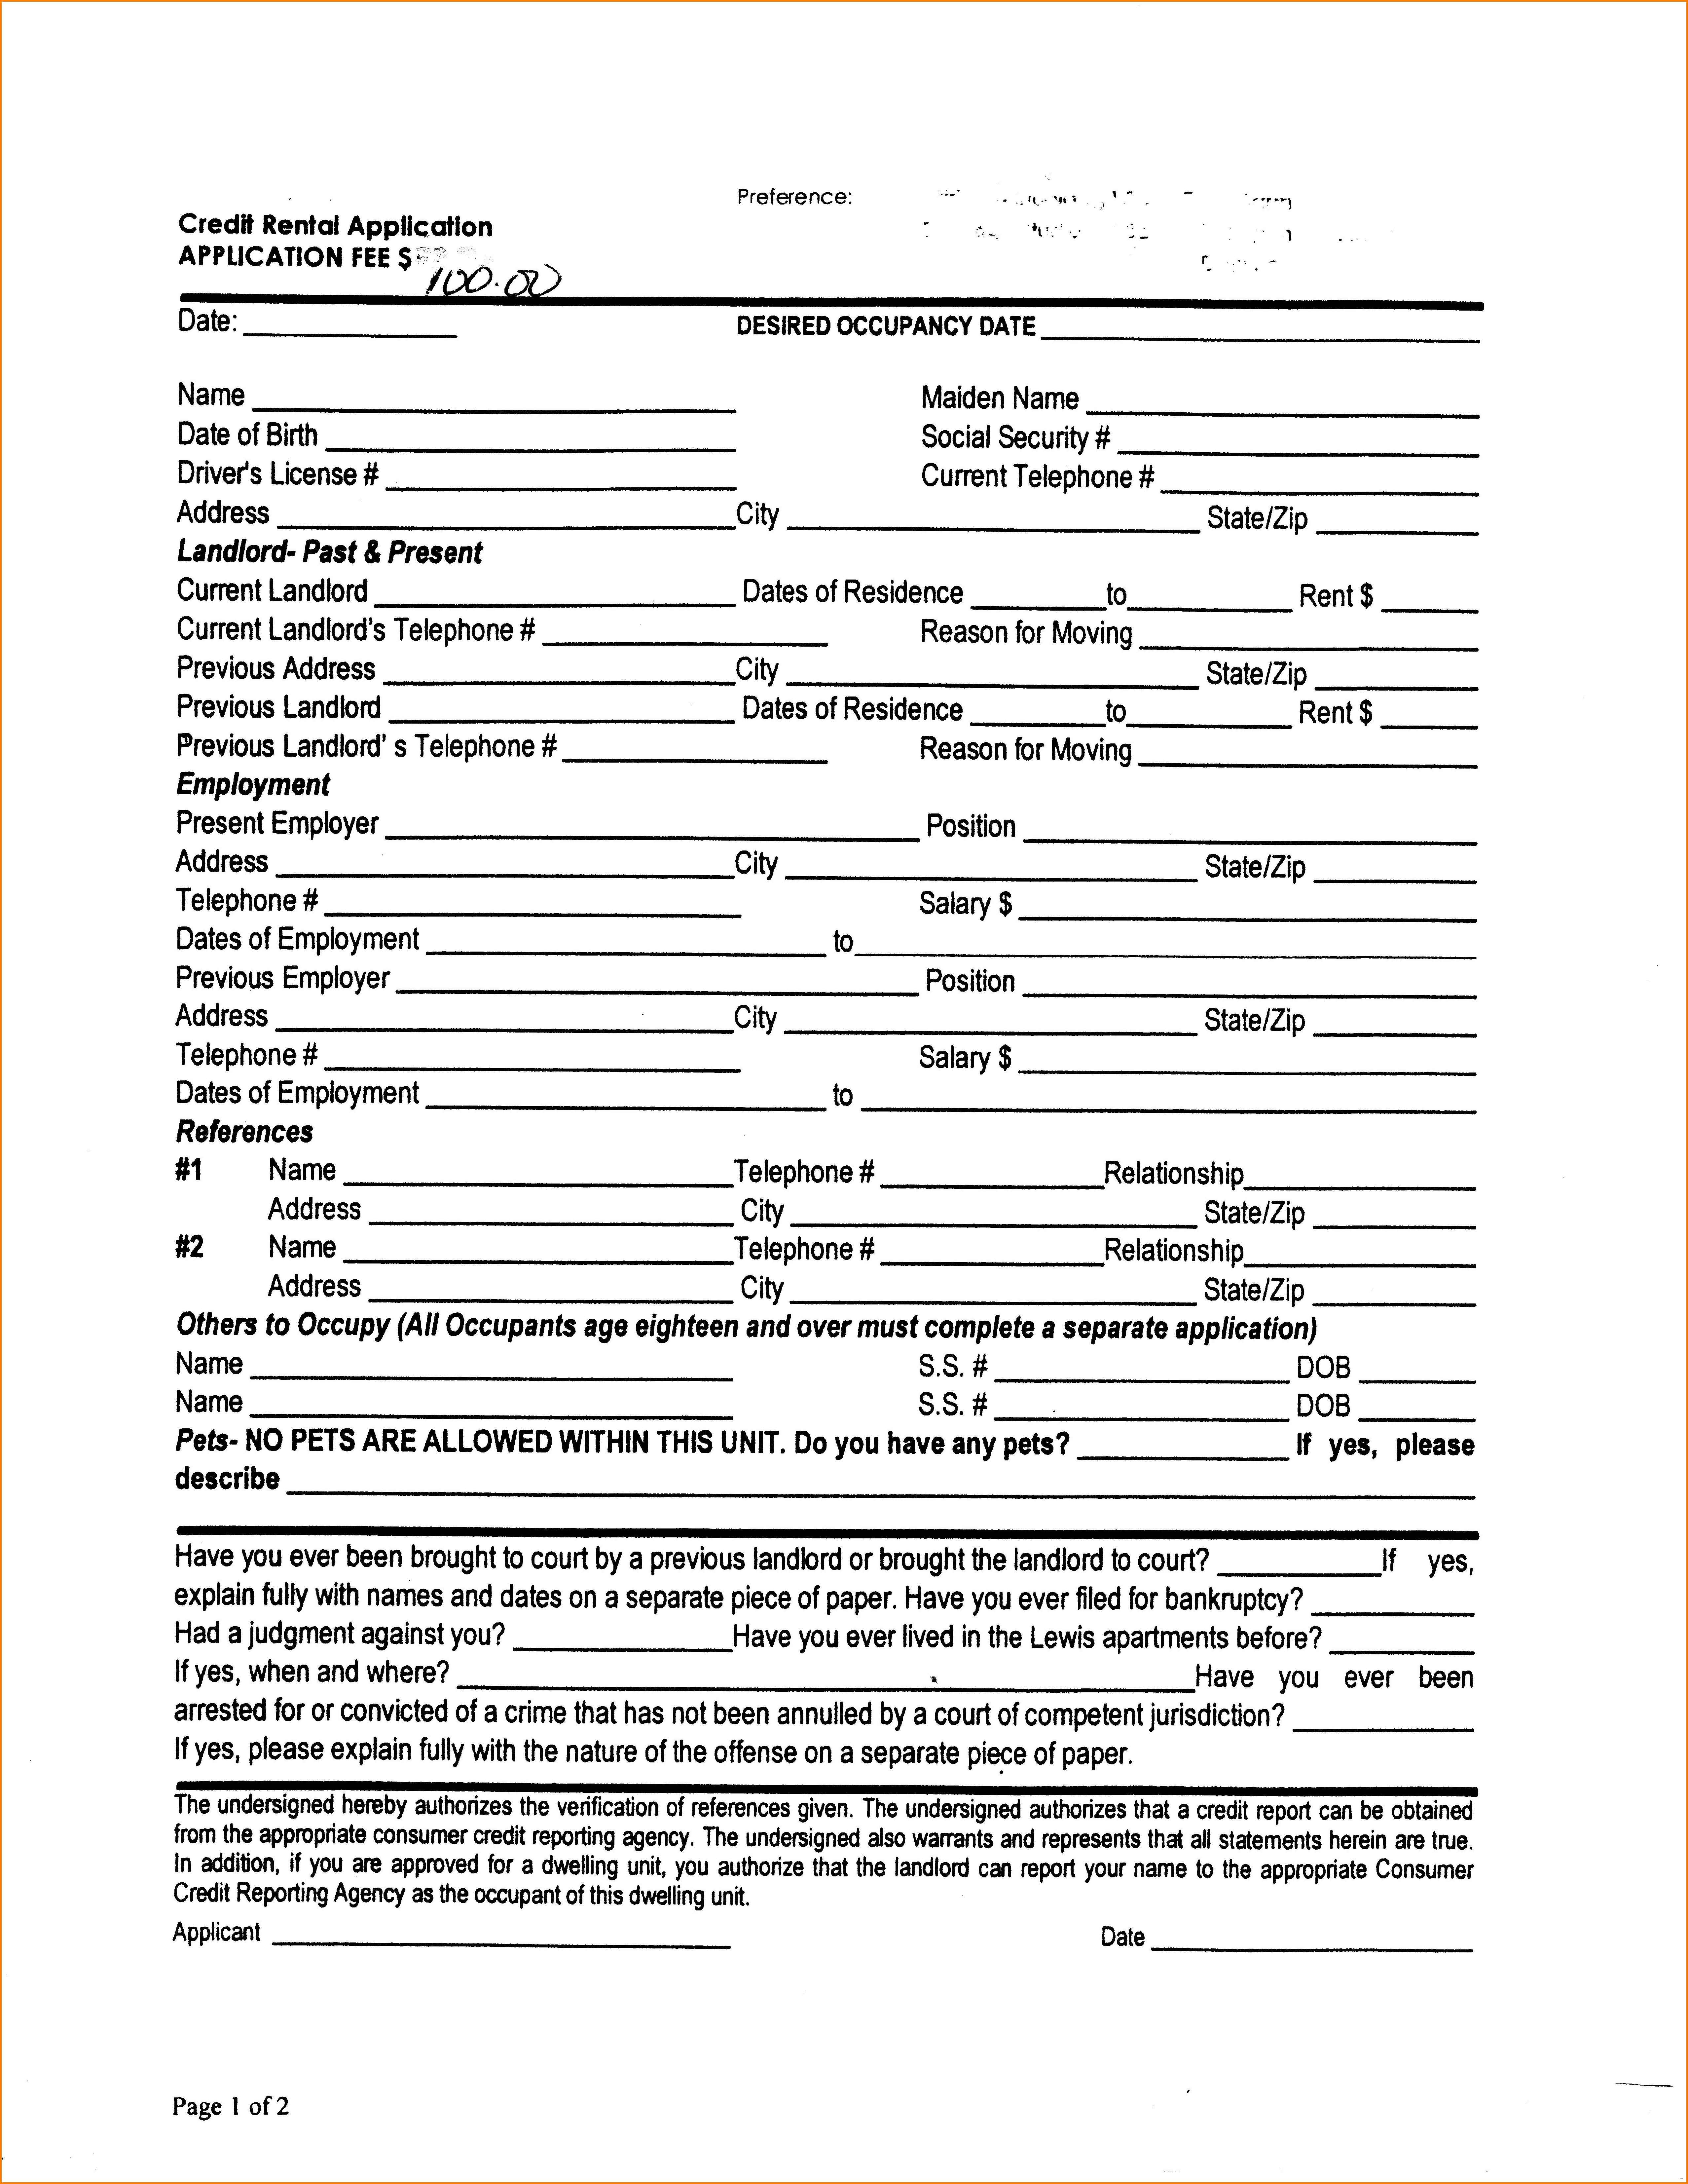 Application for house rental well picture 20 competent though 7 